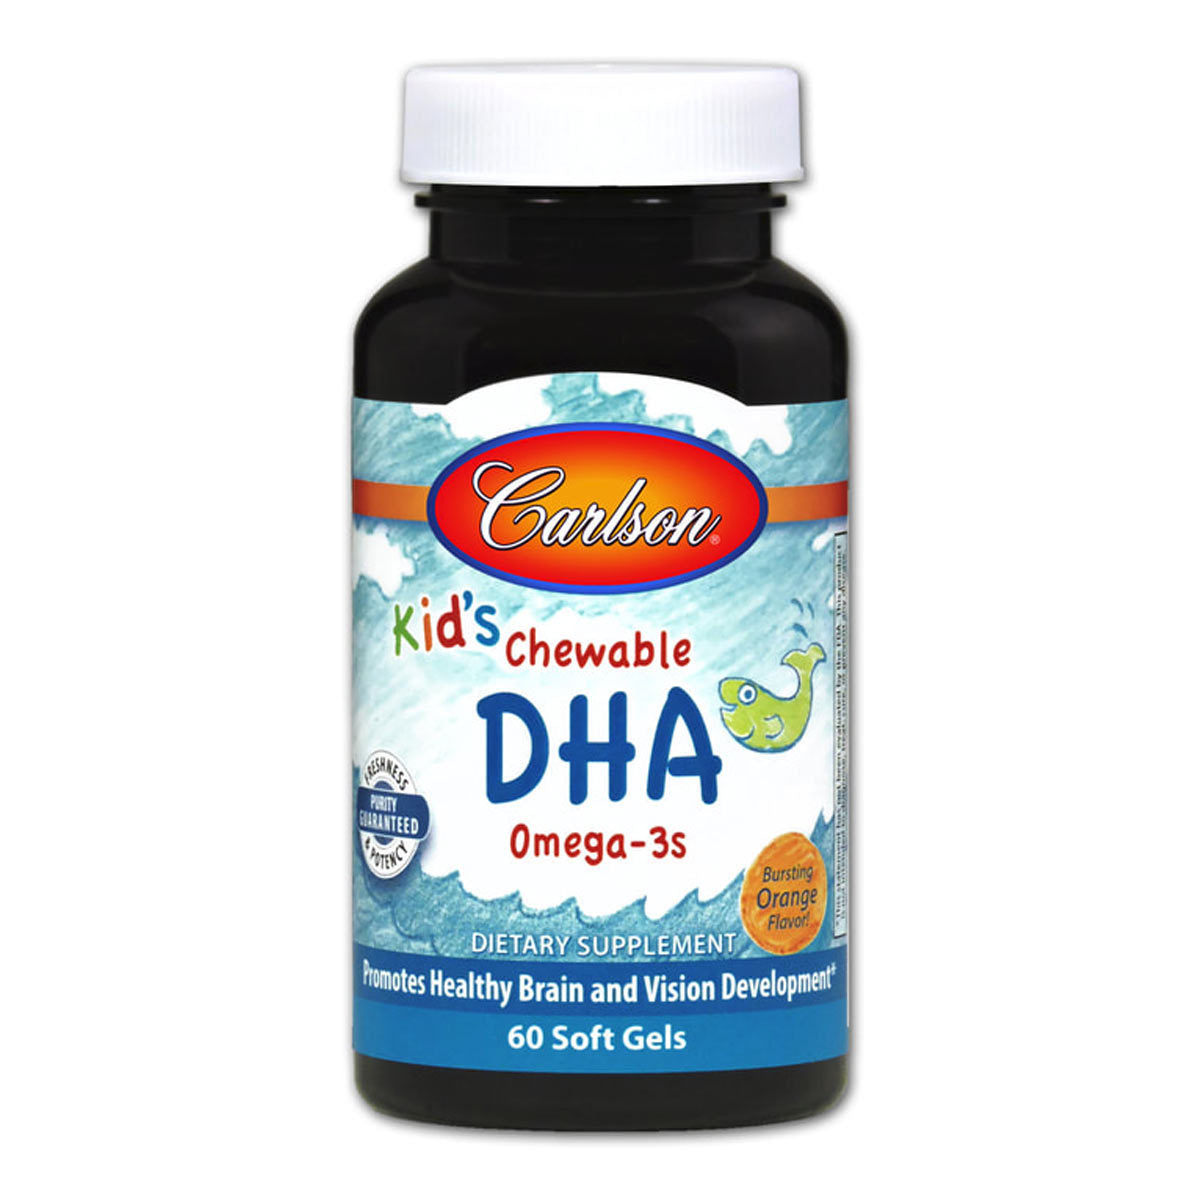 Primary image of Kids Chewable DHA